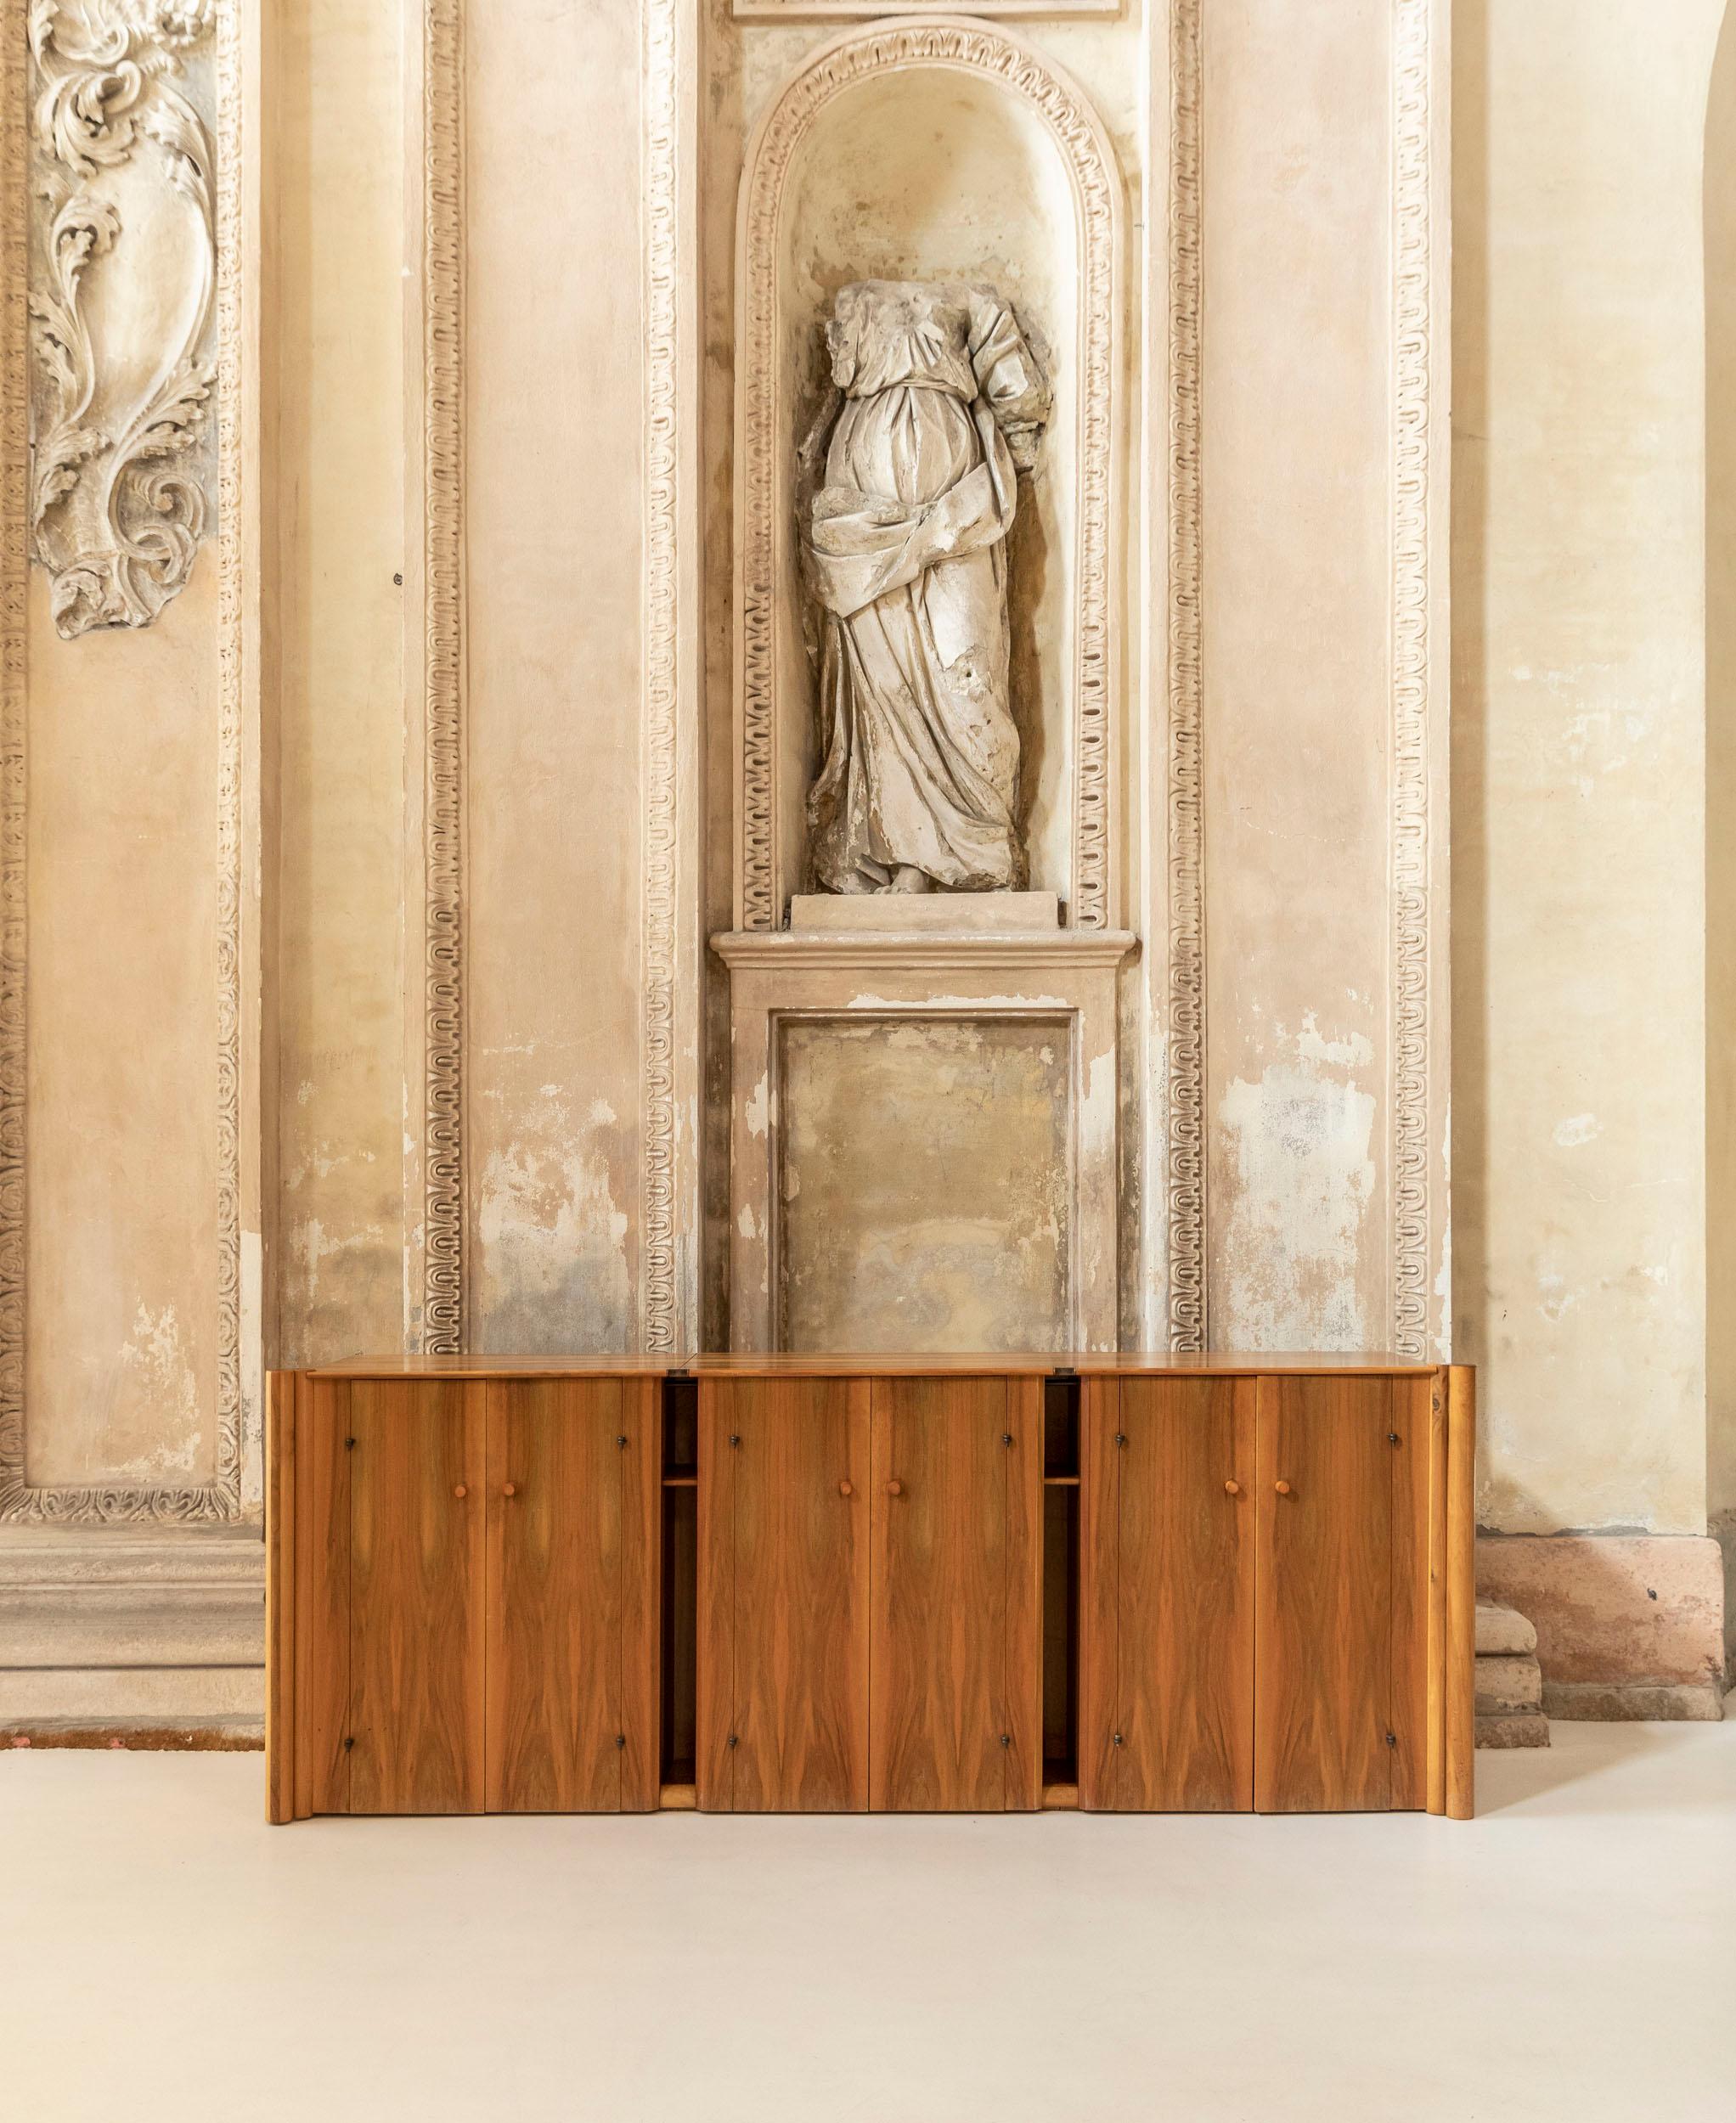 Walnut sideboard by Carlo Scarpa for Bernini.
Three different pieces with front horizontal open of the six doors with double cylindrical elements side by side. Two pieces present two shelves, one has one shelf and three